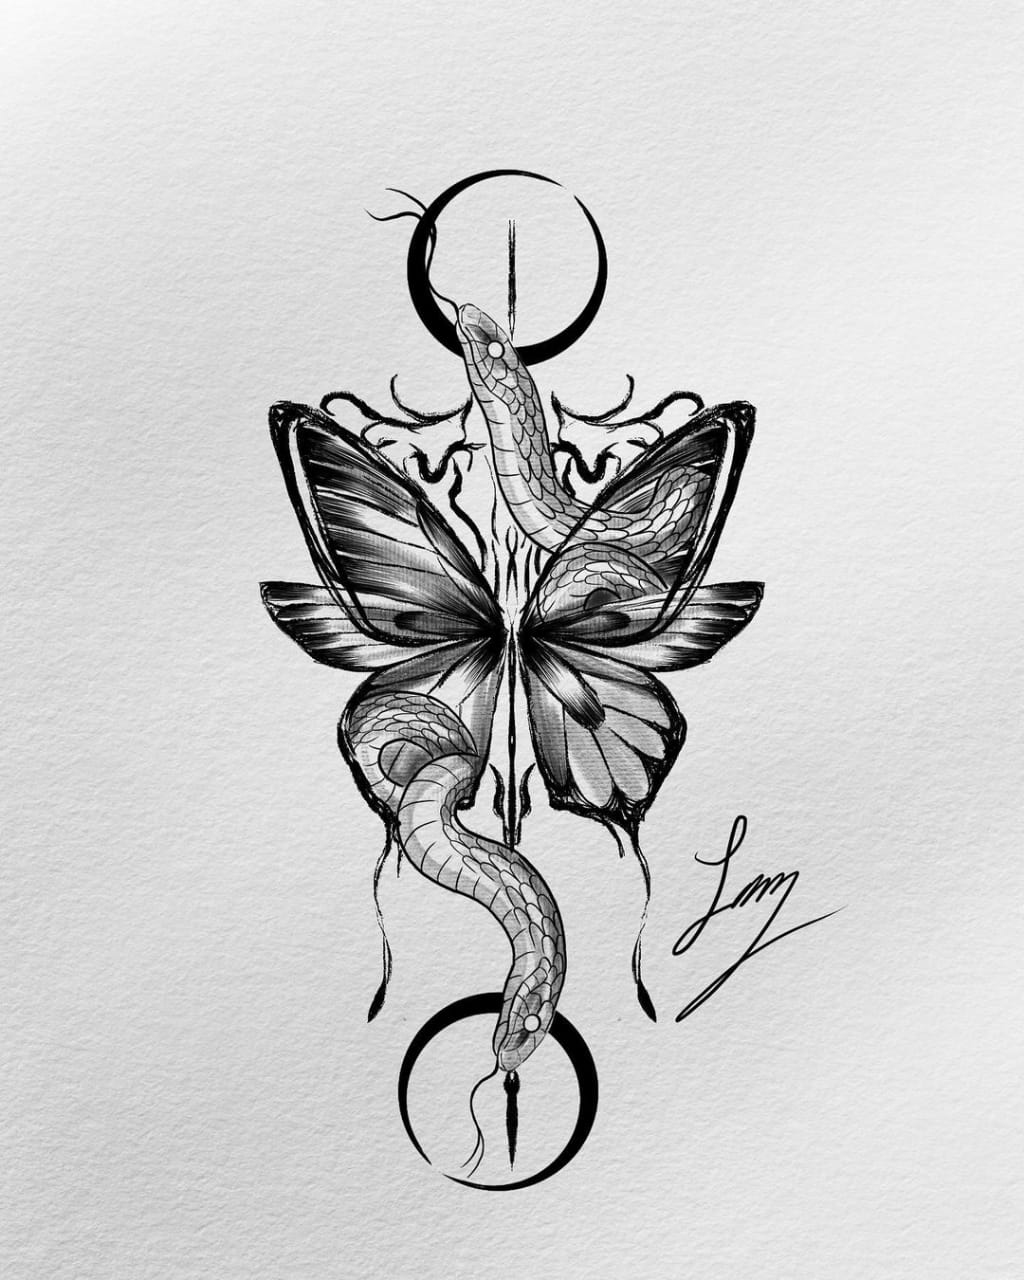 butterfly tattoo photo 04022019 324  tattoo idea with a butterfly   tattoovaluenet  tattoovaluenet